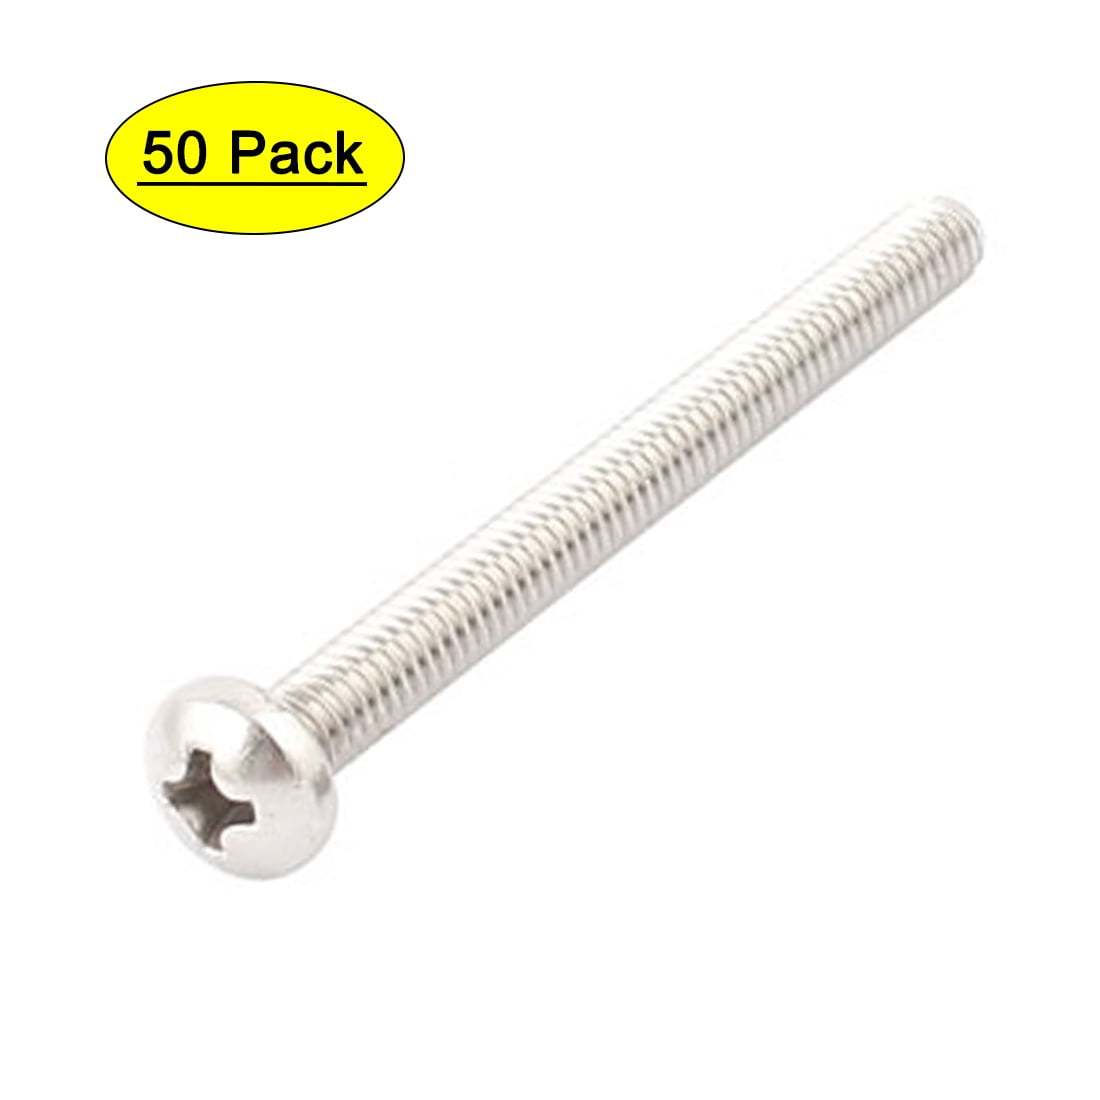 #8 x 1-1/2" Round Head Wood Screws Slotted Drive Stainless Steel Quantity 50 